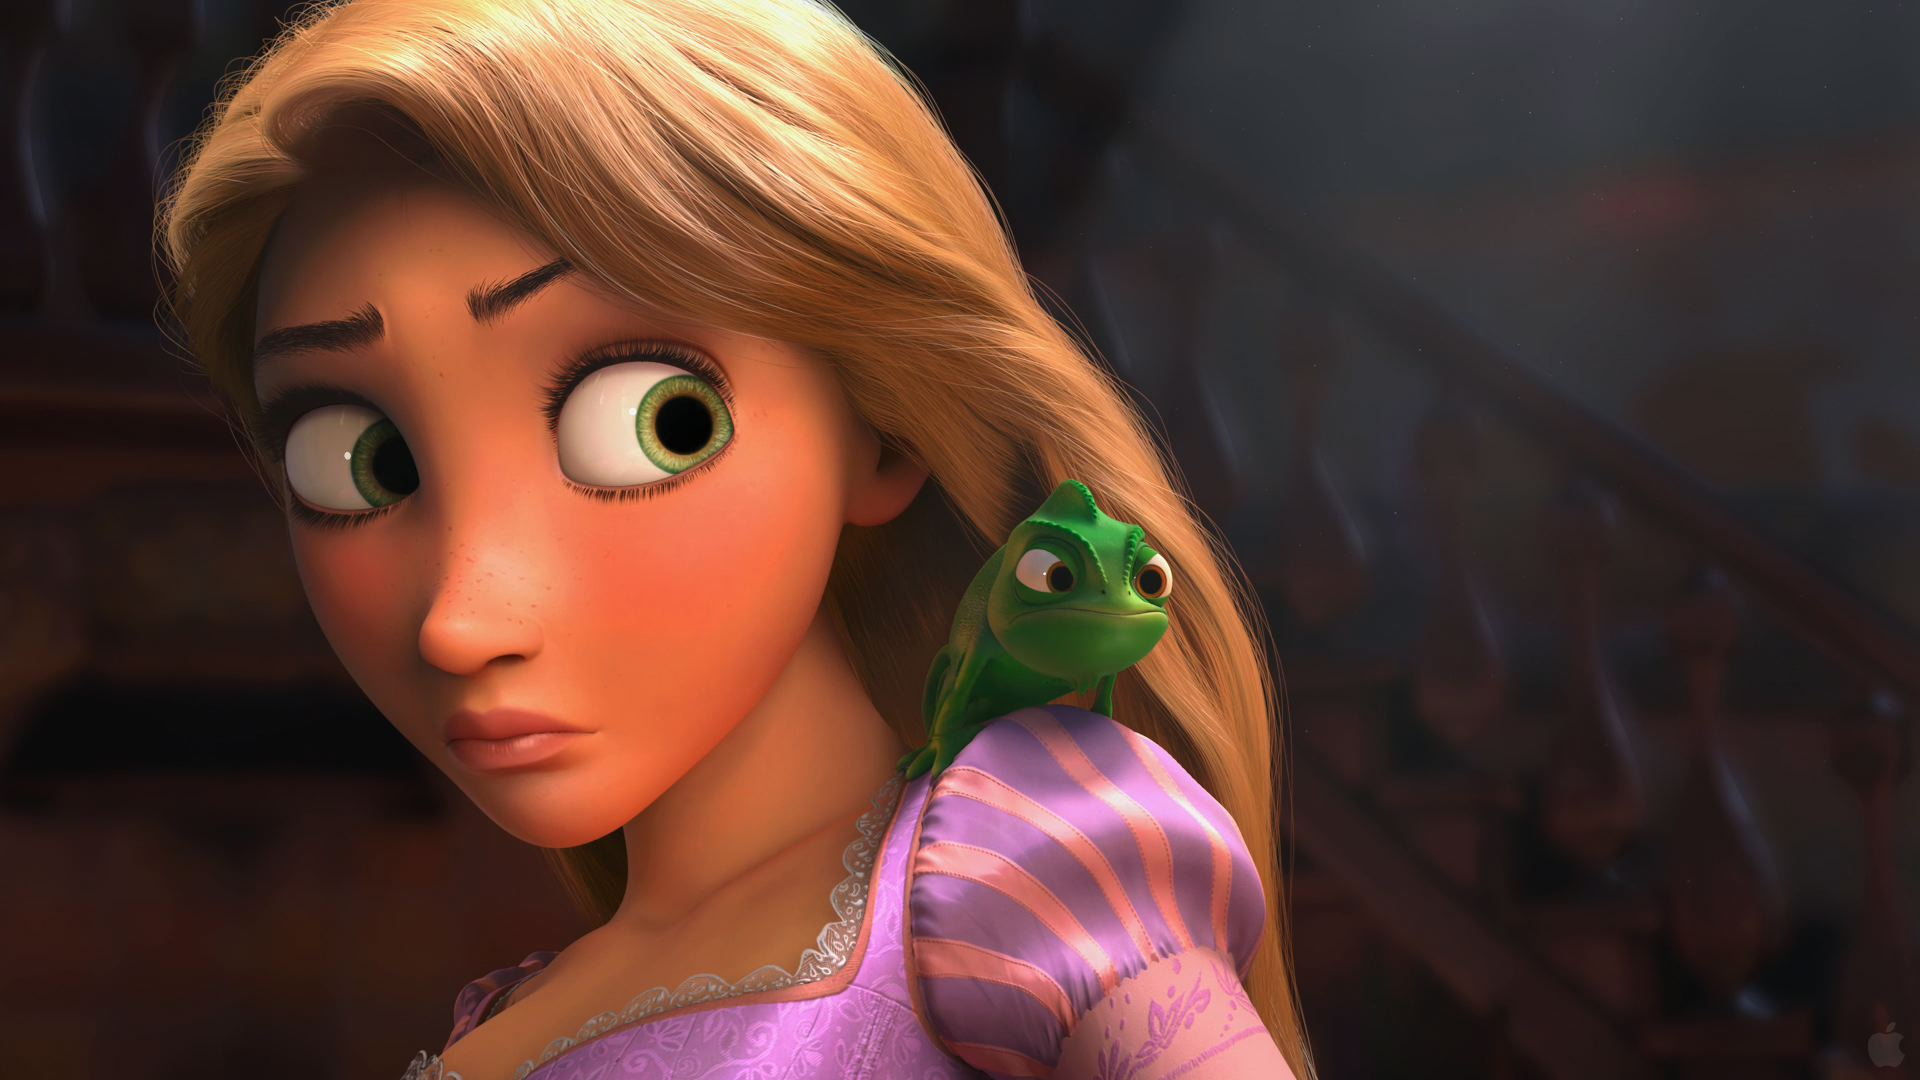 1920x1080 Rapunzel and Pascal from Tangled Desktop Wallpaper